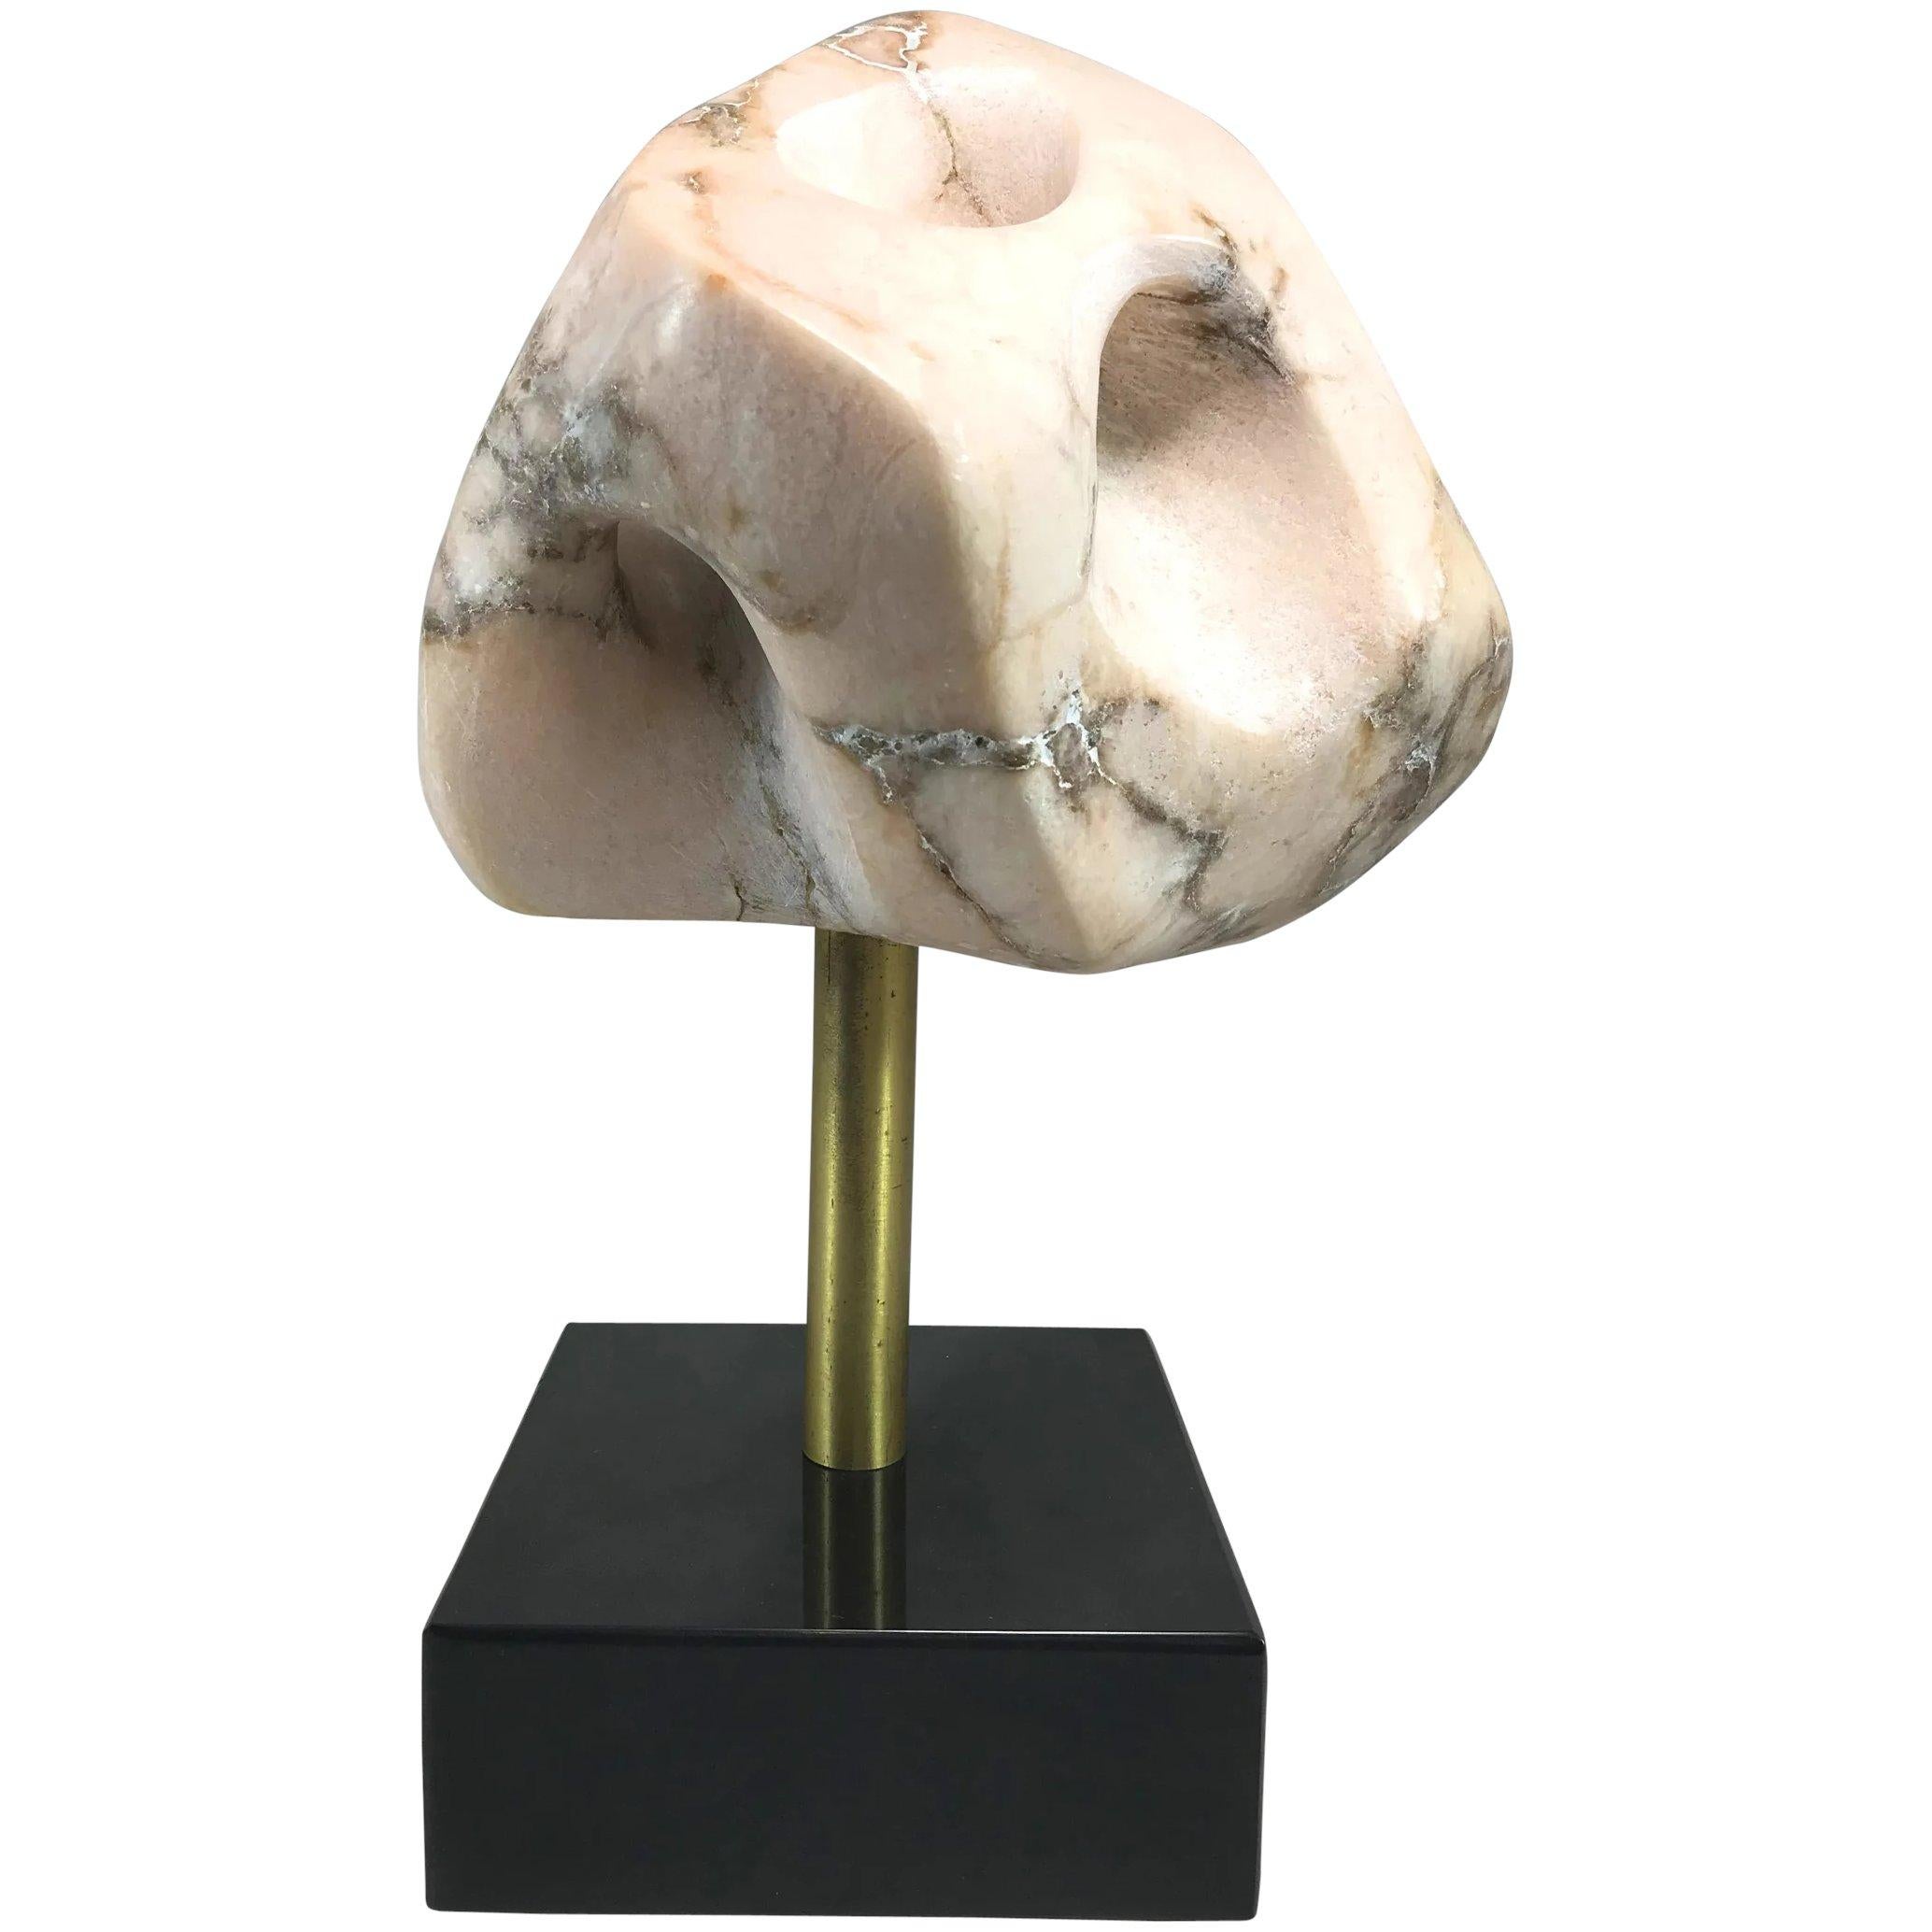 A fine modernist abstract variegated marble sculpture with hints of rose or pink in the stone, contrasted with dark veining, mounted with a brass rod on a black polished stone plinth, unsigned, dating to the 20th century. Some slight yellow